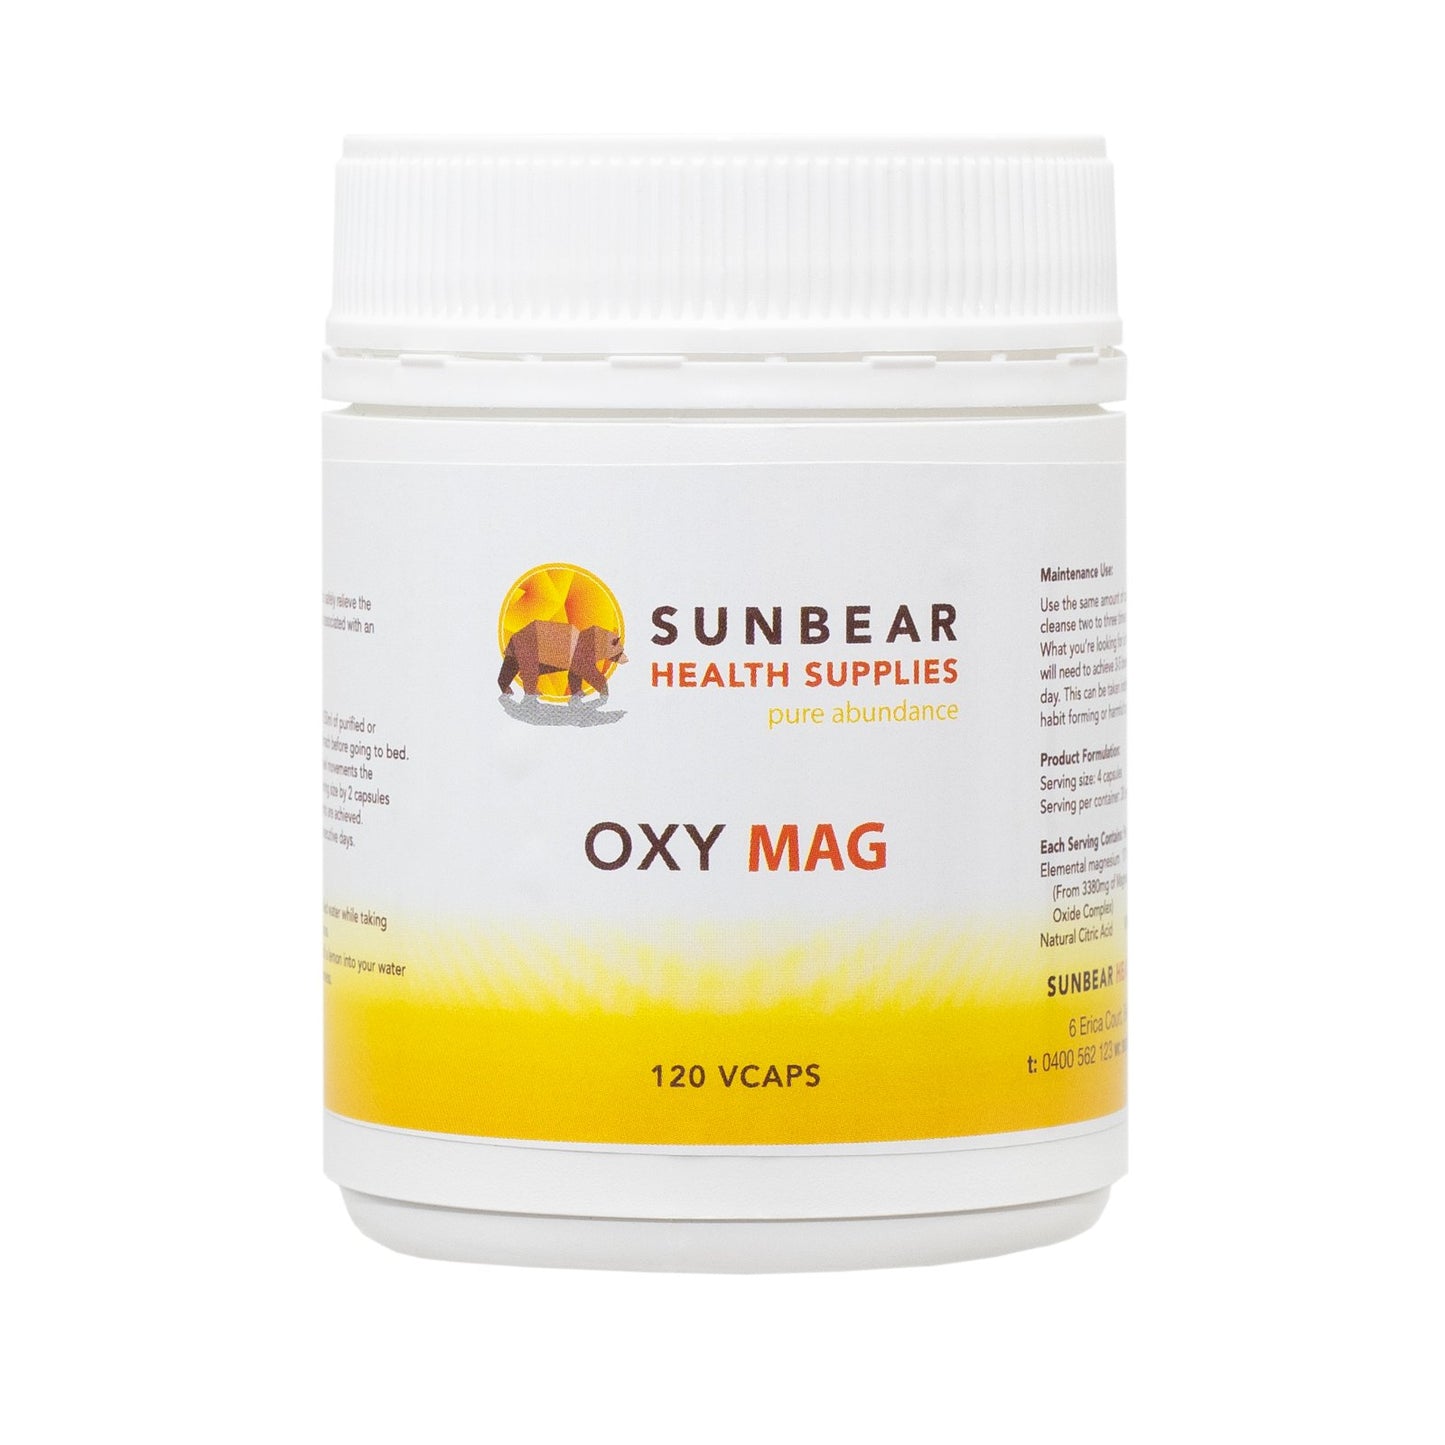 Oxy Mag Powder x 2 - Oxygenated Magnesium Intestinal Cleanse - Sunbear Health Supplies - 120 Capsules